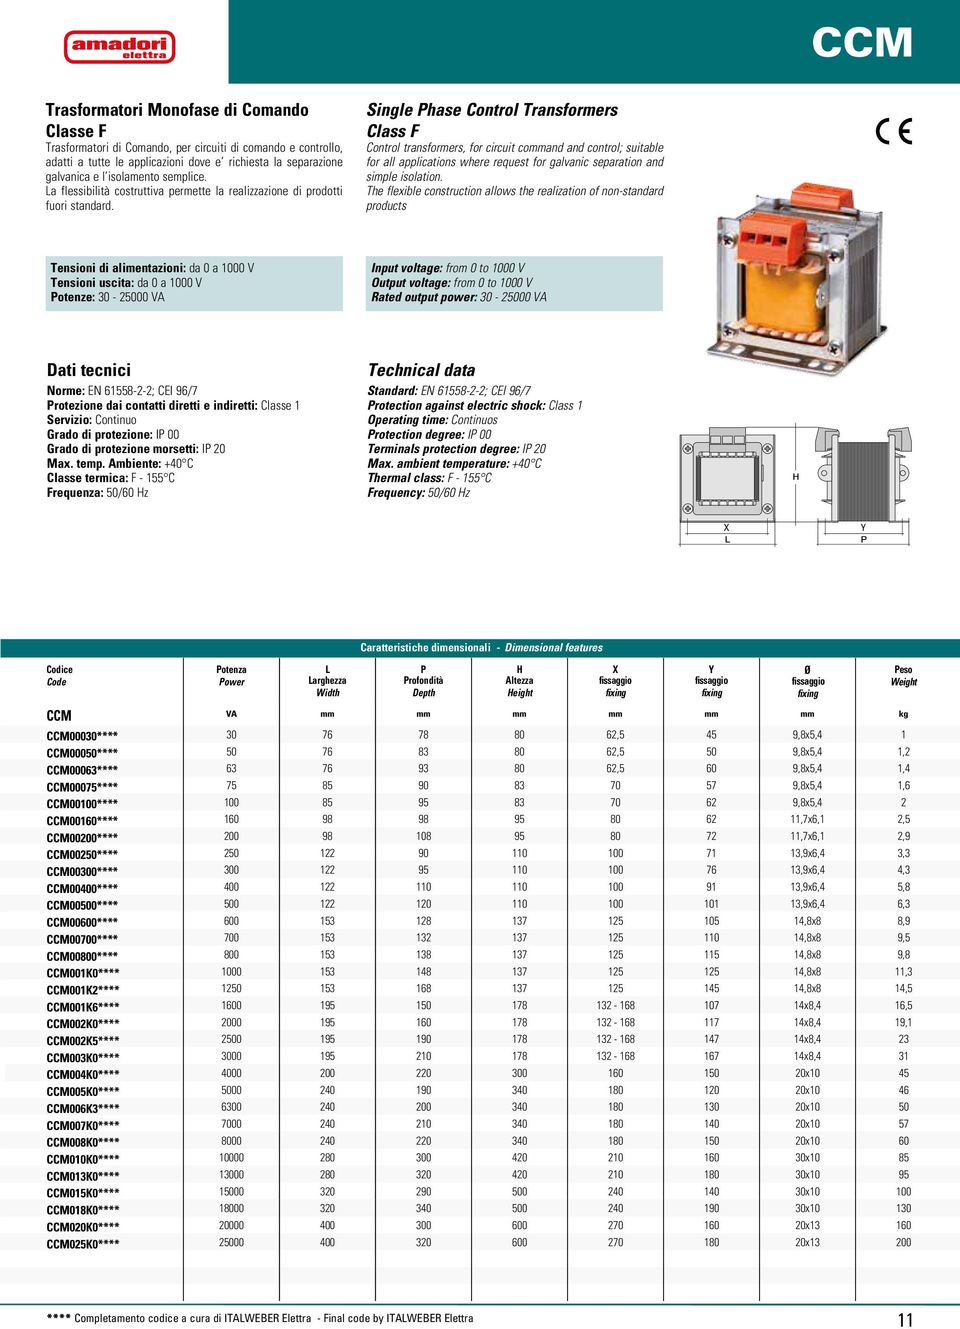 Single hase Control Transformers Class F Control transformers, for circuit command and control; suitable for all applications where request for galvanic separation and simple isolation.